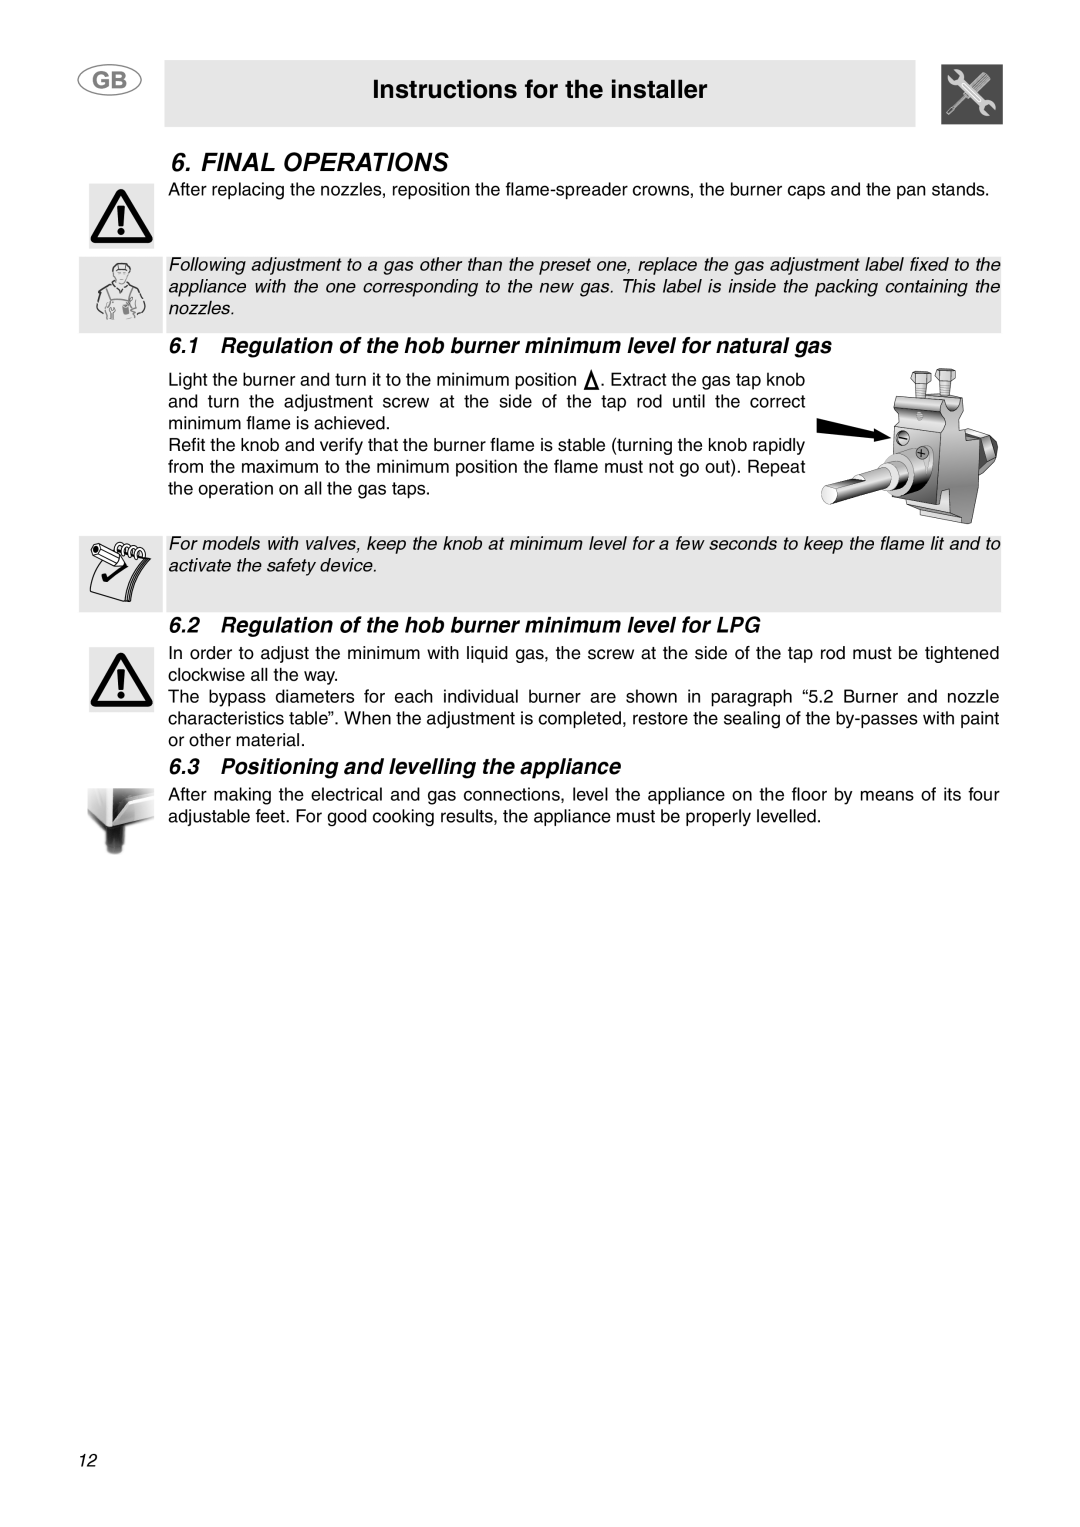 Smeg SY4110 manual Positioning and levelling the appliance, Instructions for the installer, Final Operations 